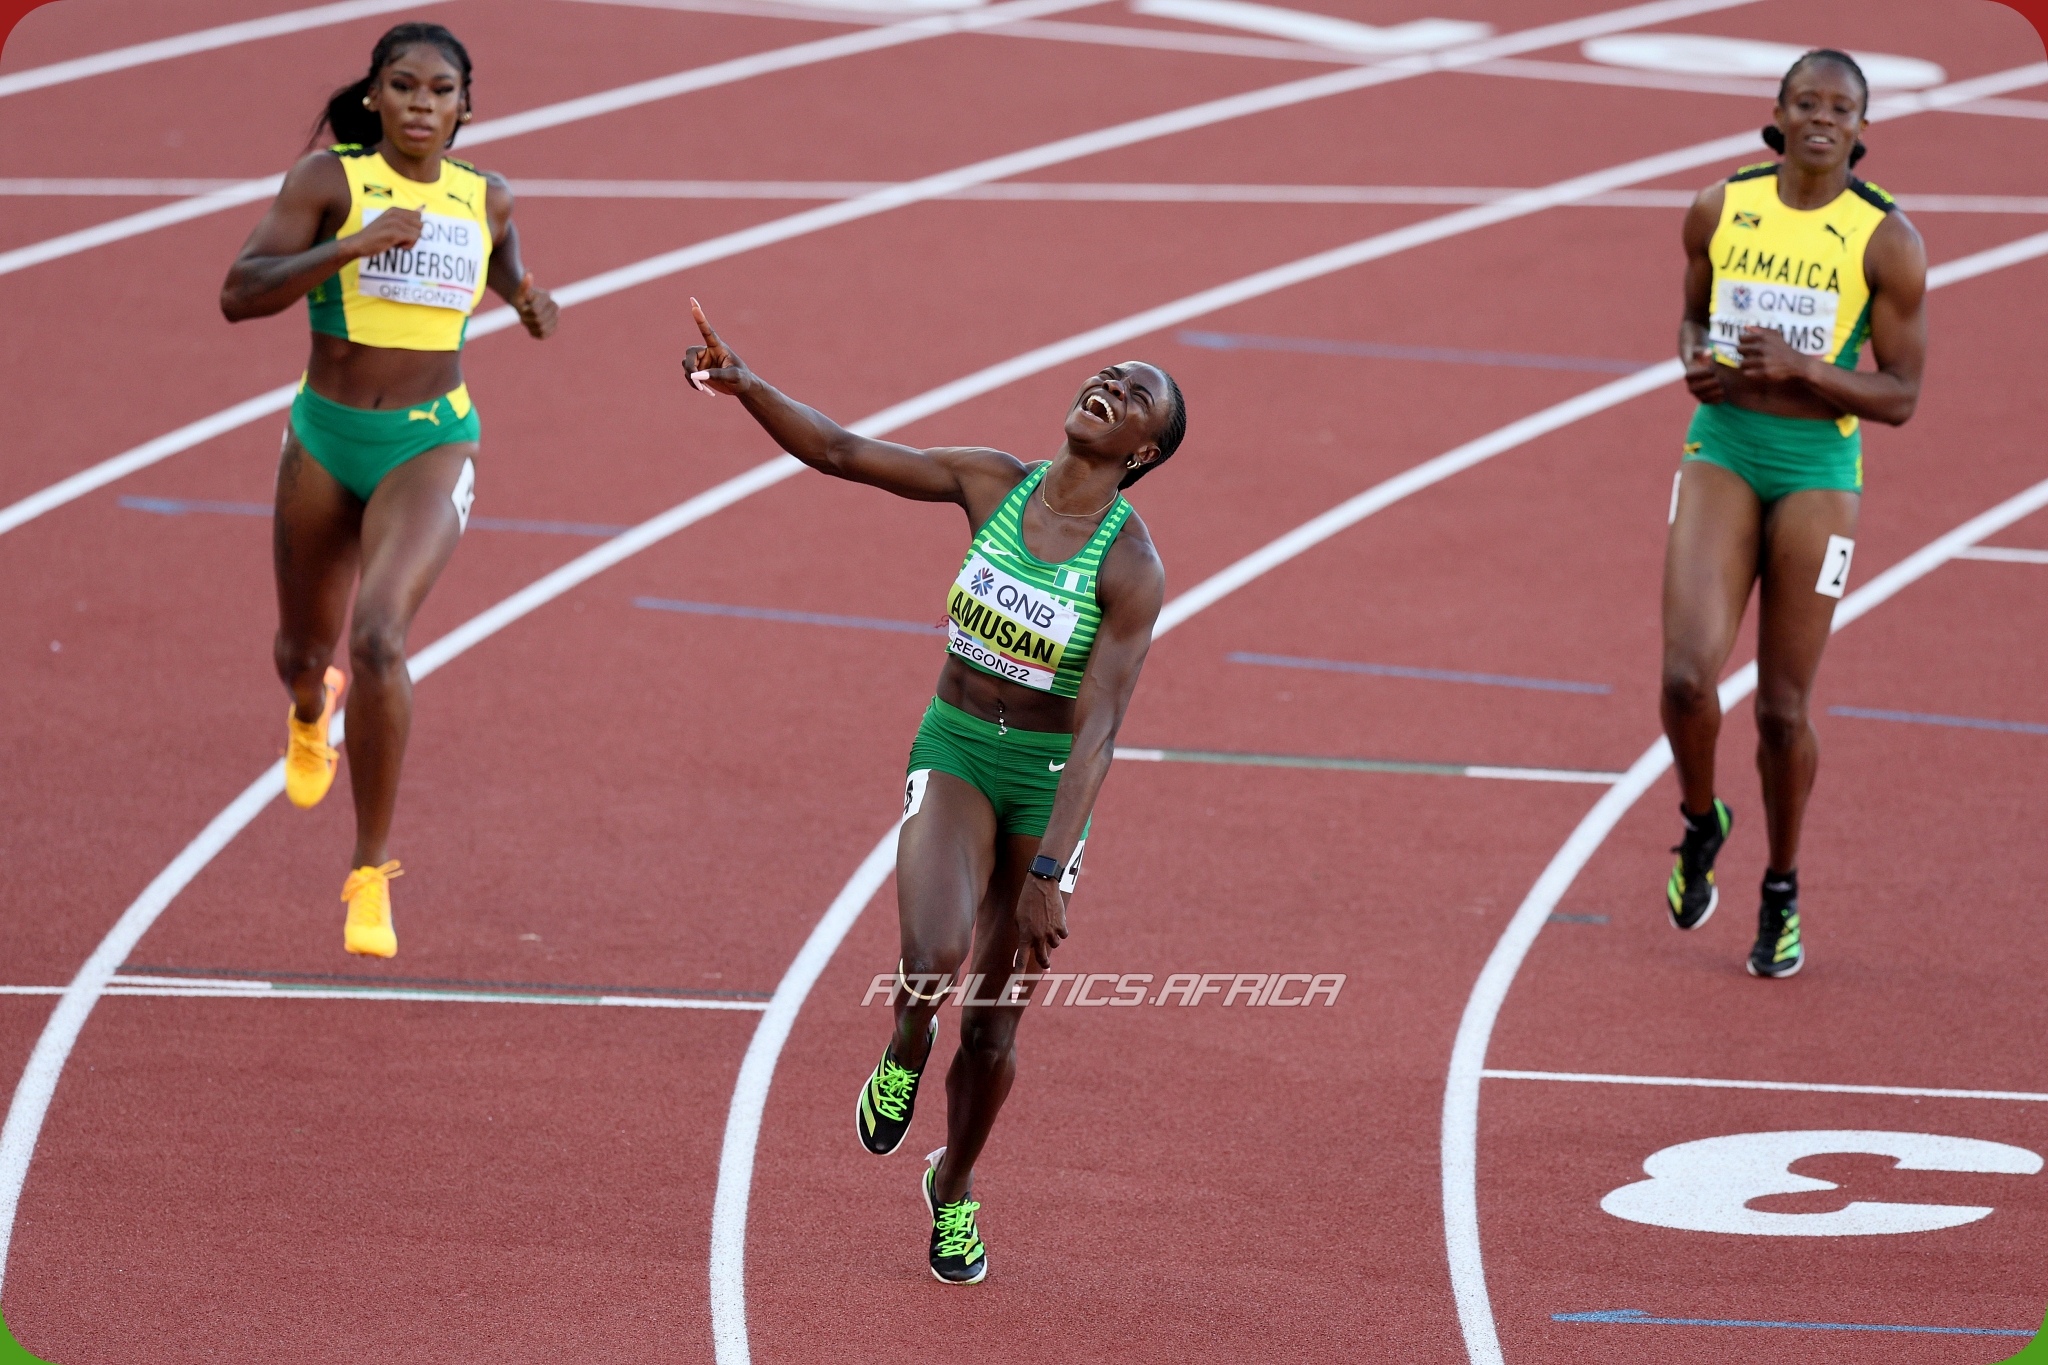 Britany Anderson of Team Jamaica, Tobi Amusan of Team Nigeria and Danielle Williams of Team Jamaica cross the finish line in the Women's 100m Hurdles Final on day ten of the World Athletics Championships Oregon22 at Hayward Field on July 24, 2022 in Eugene, Oregon. (Photo by Andy Lyons/Getty Images for World Athletics)